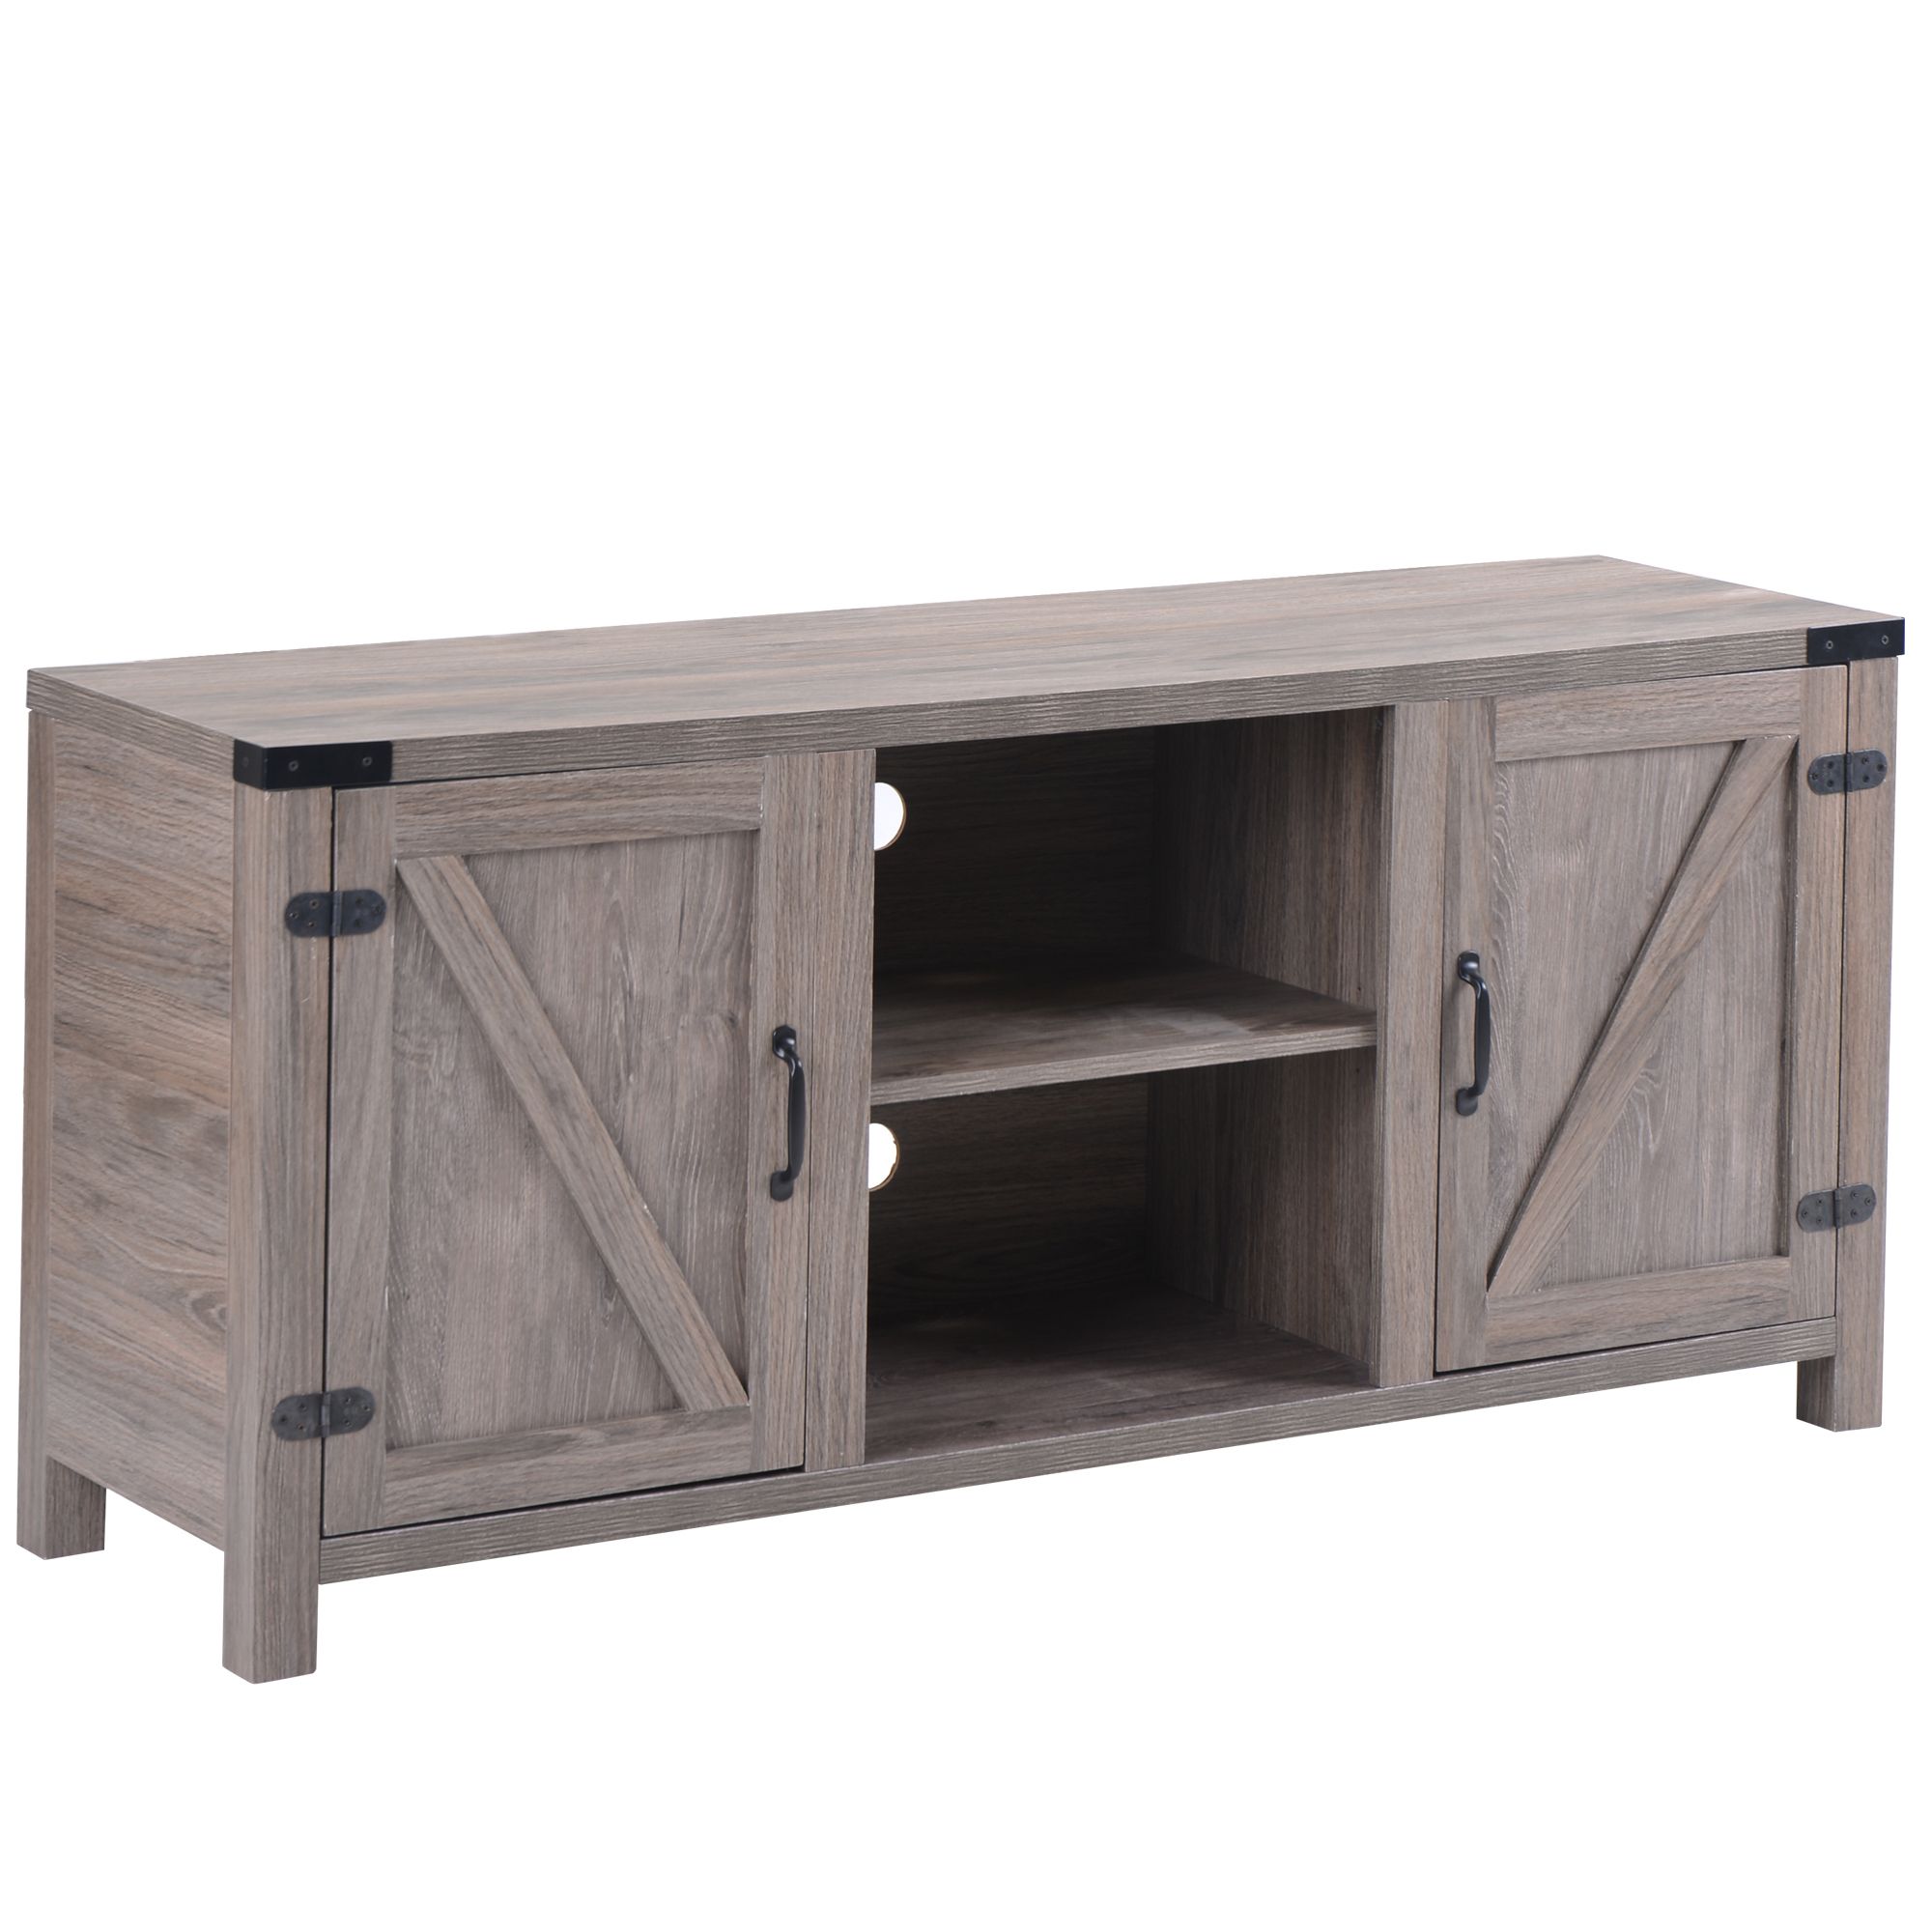 Clearance! 58'' Farmhouse Tv Stands For Tvs Up To 65 Inside Labarbera Tv Stands For Tvs Up To 58" (View 14 of 15)